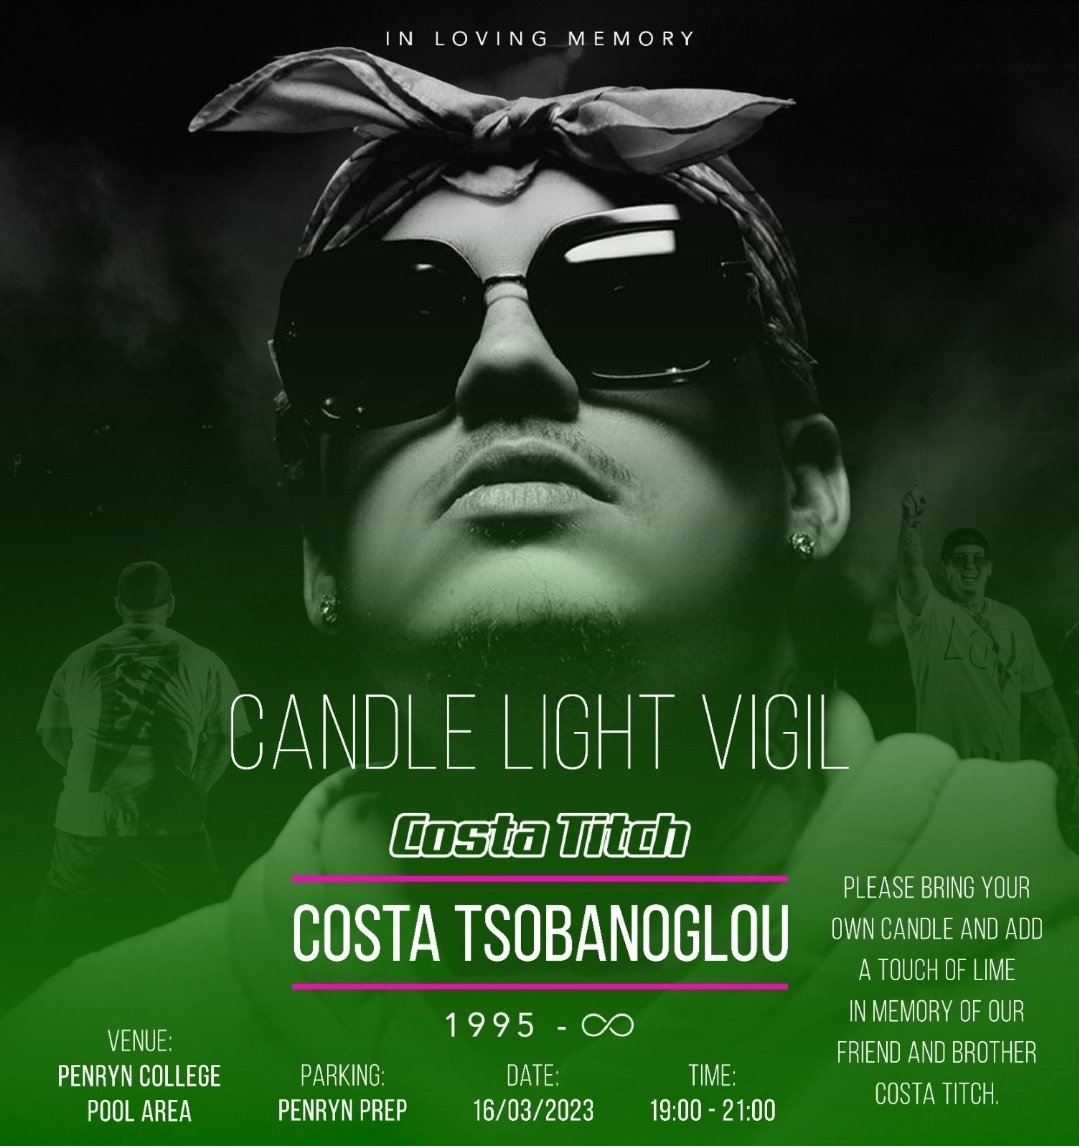 Nelspruit, show love to our boy. One of our own. Night vigil will be at Penryn on the 16th of March #RIPCostaTitch